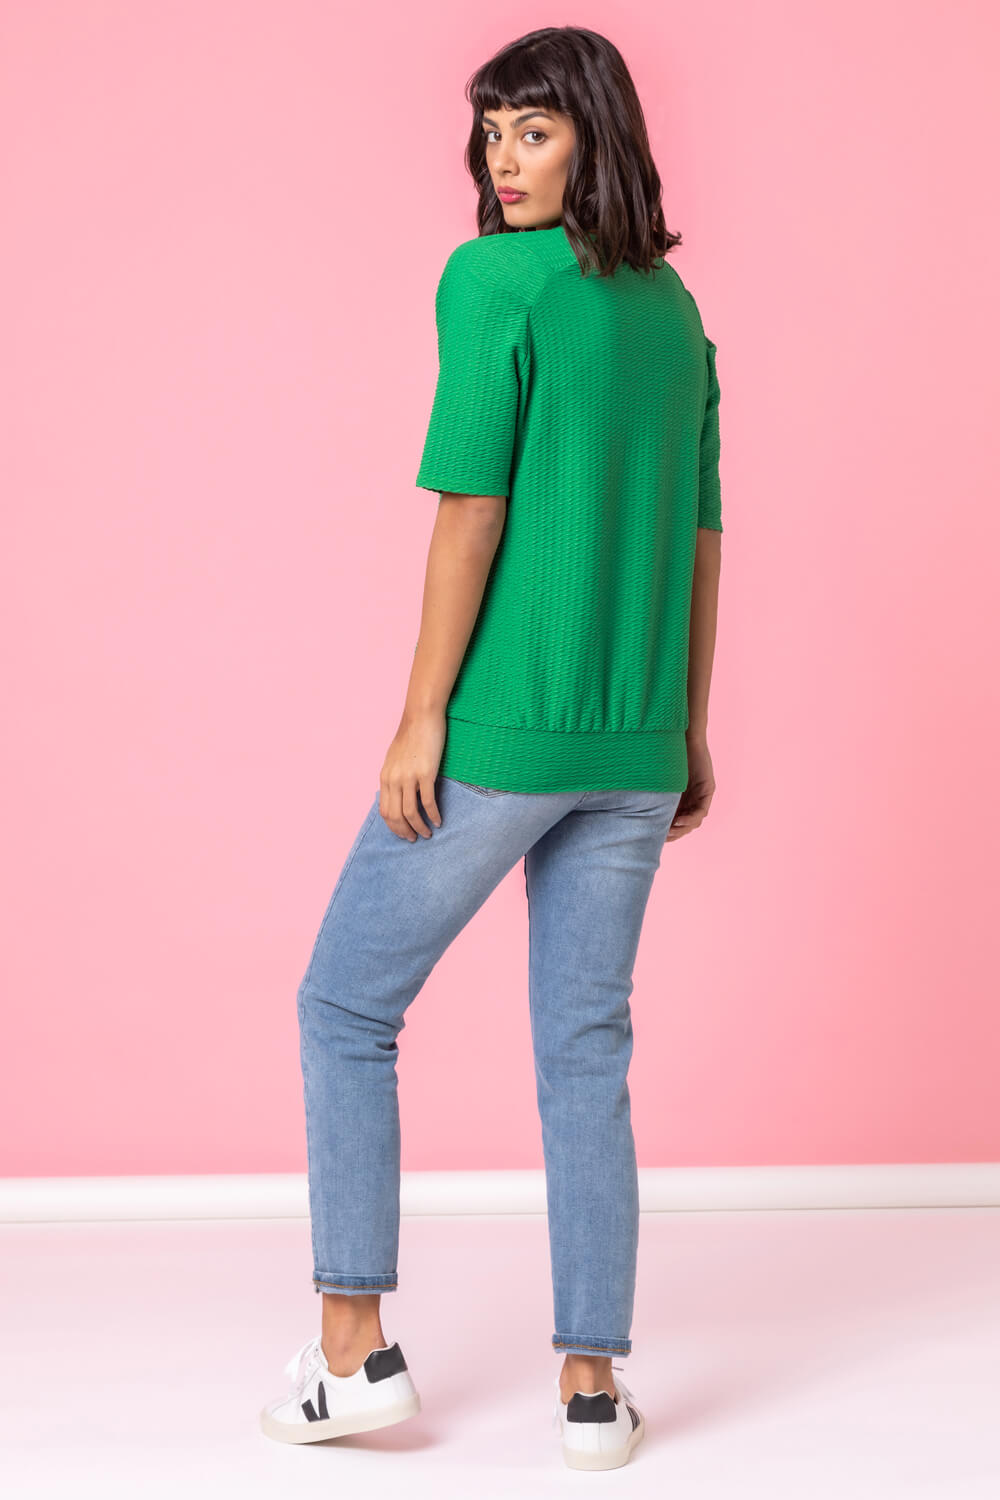 Green Keyhole Neck Textured Top, Image 2 of 4